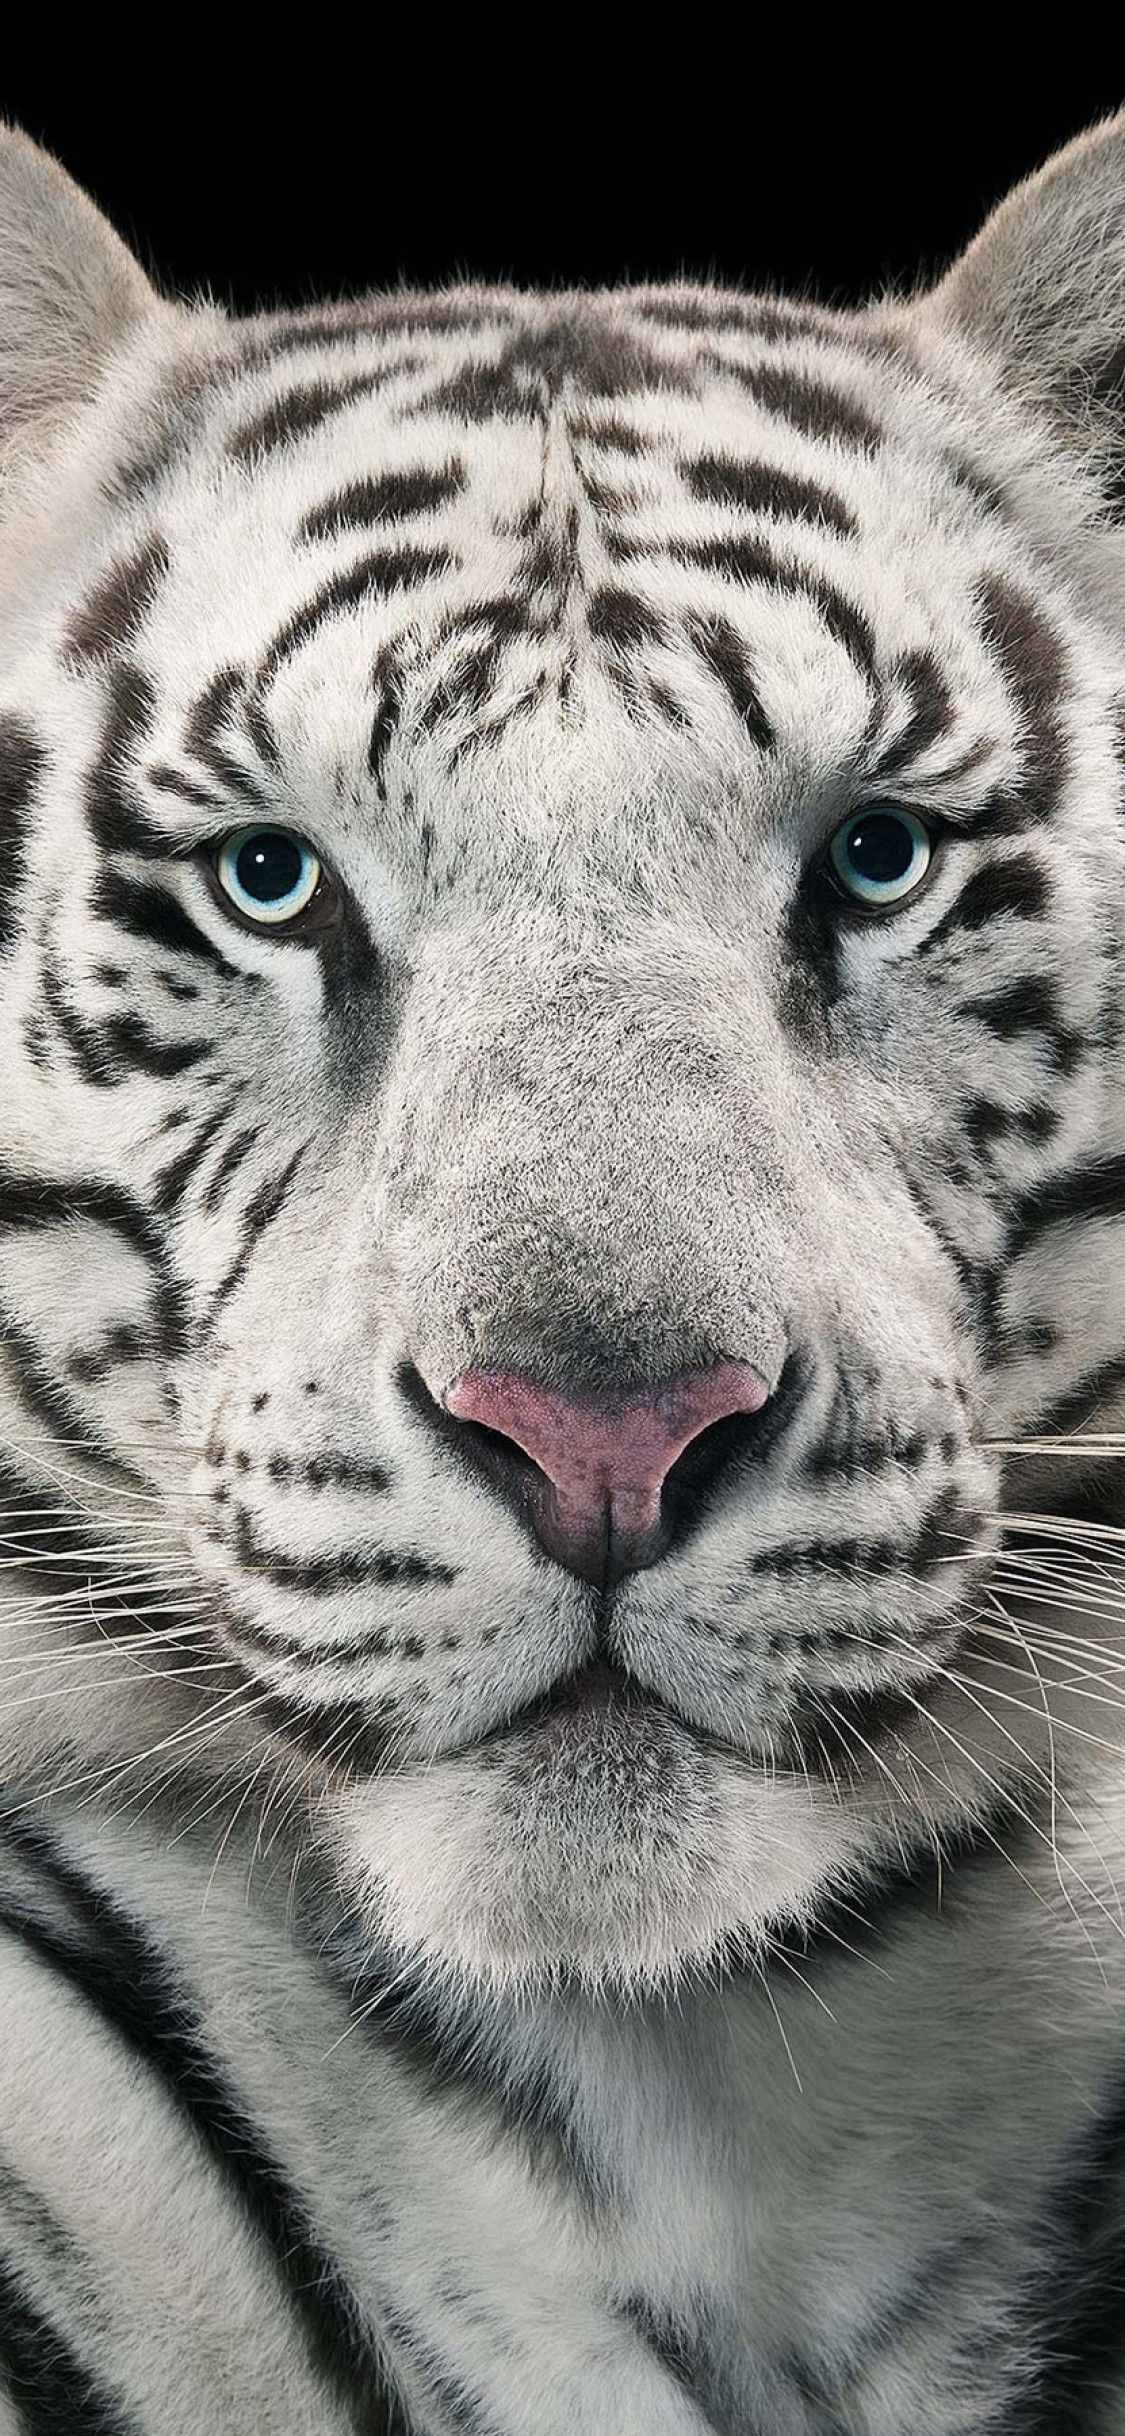 White Tiger, Close Up Face Tiger Wallpaper HD For IPhone X